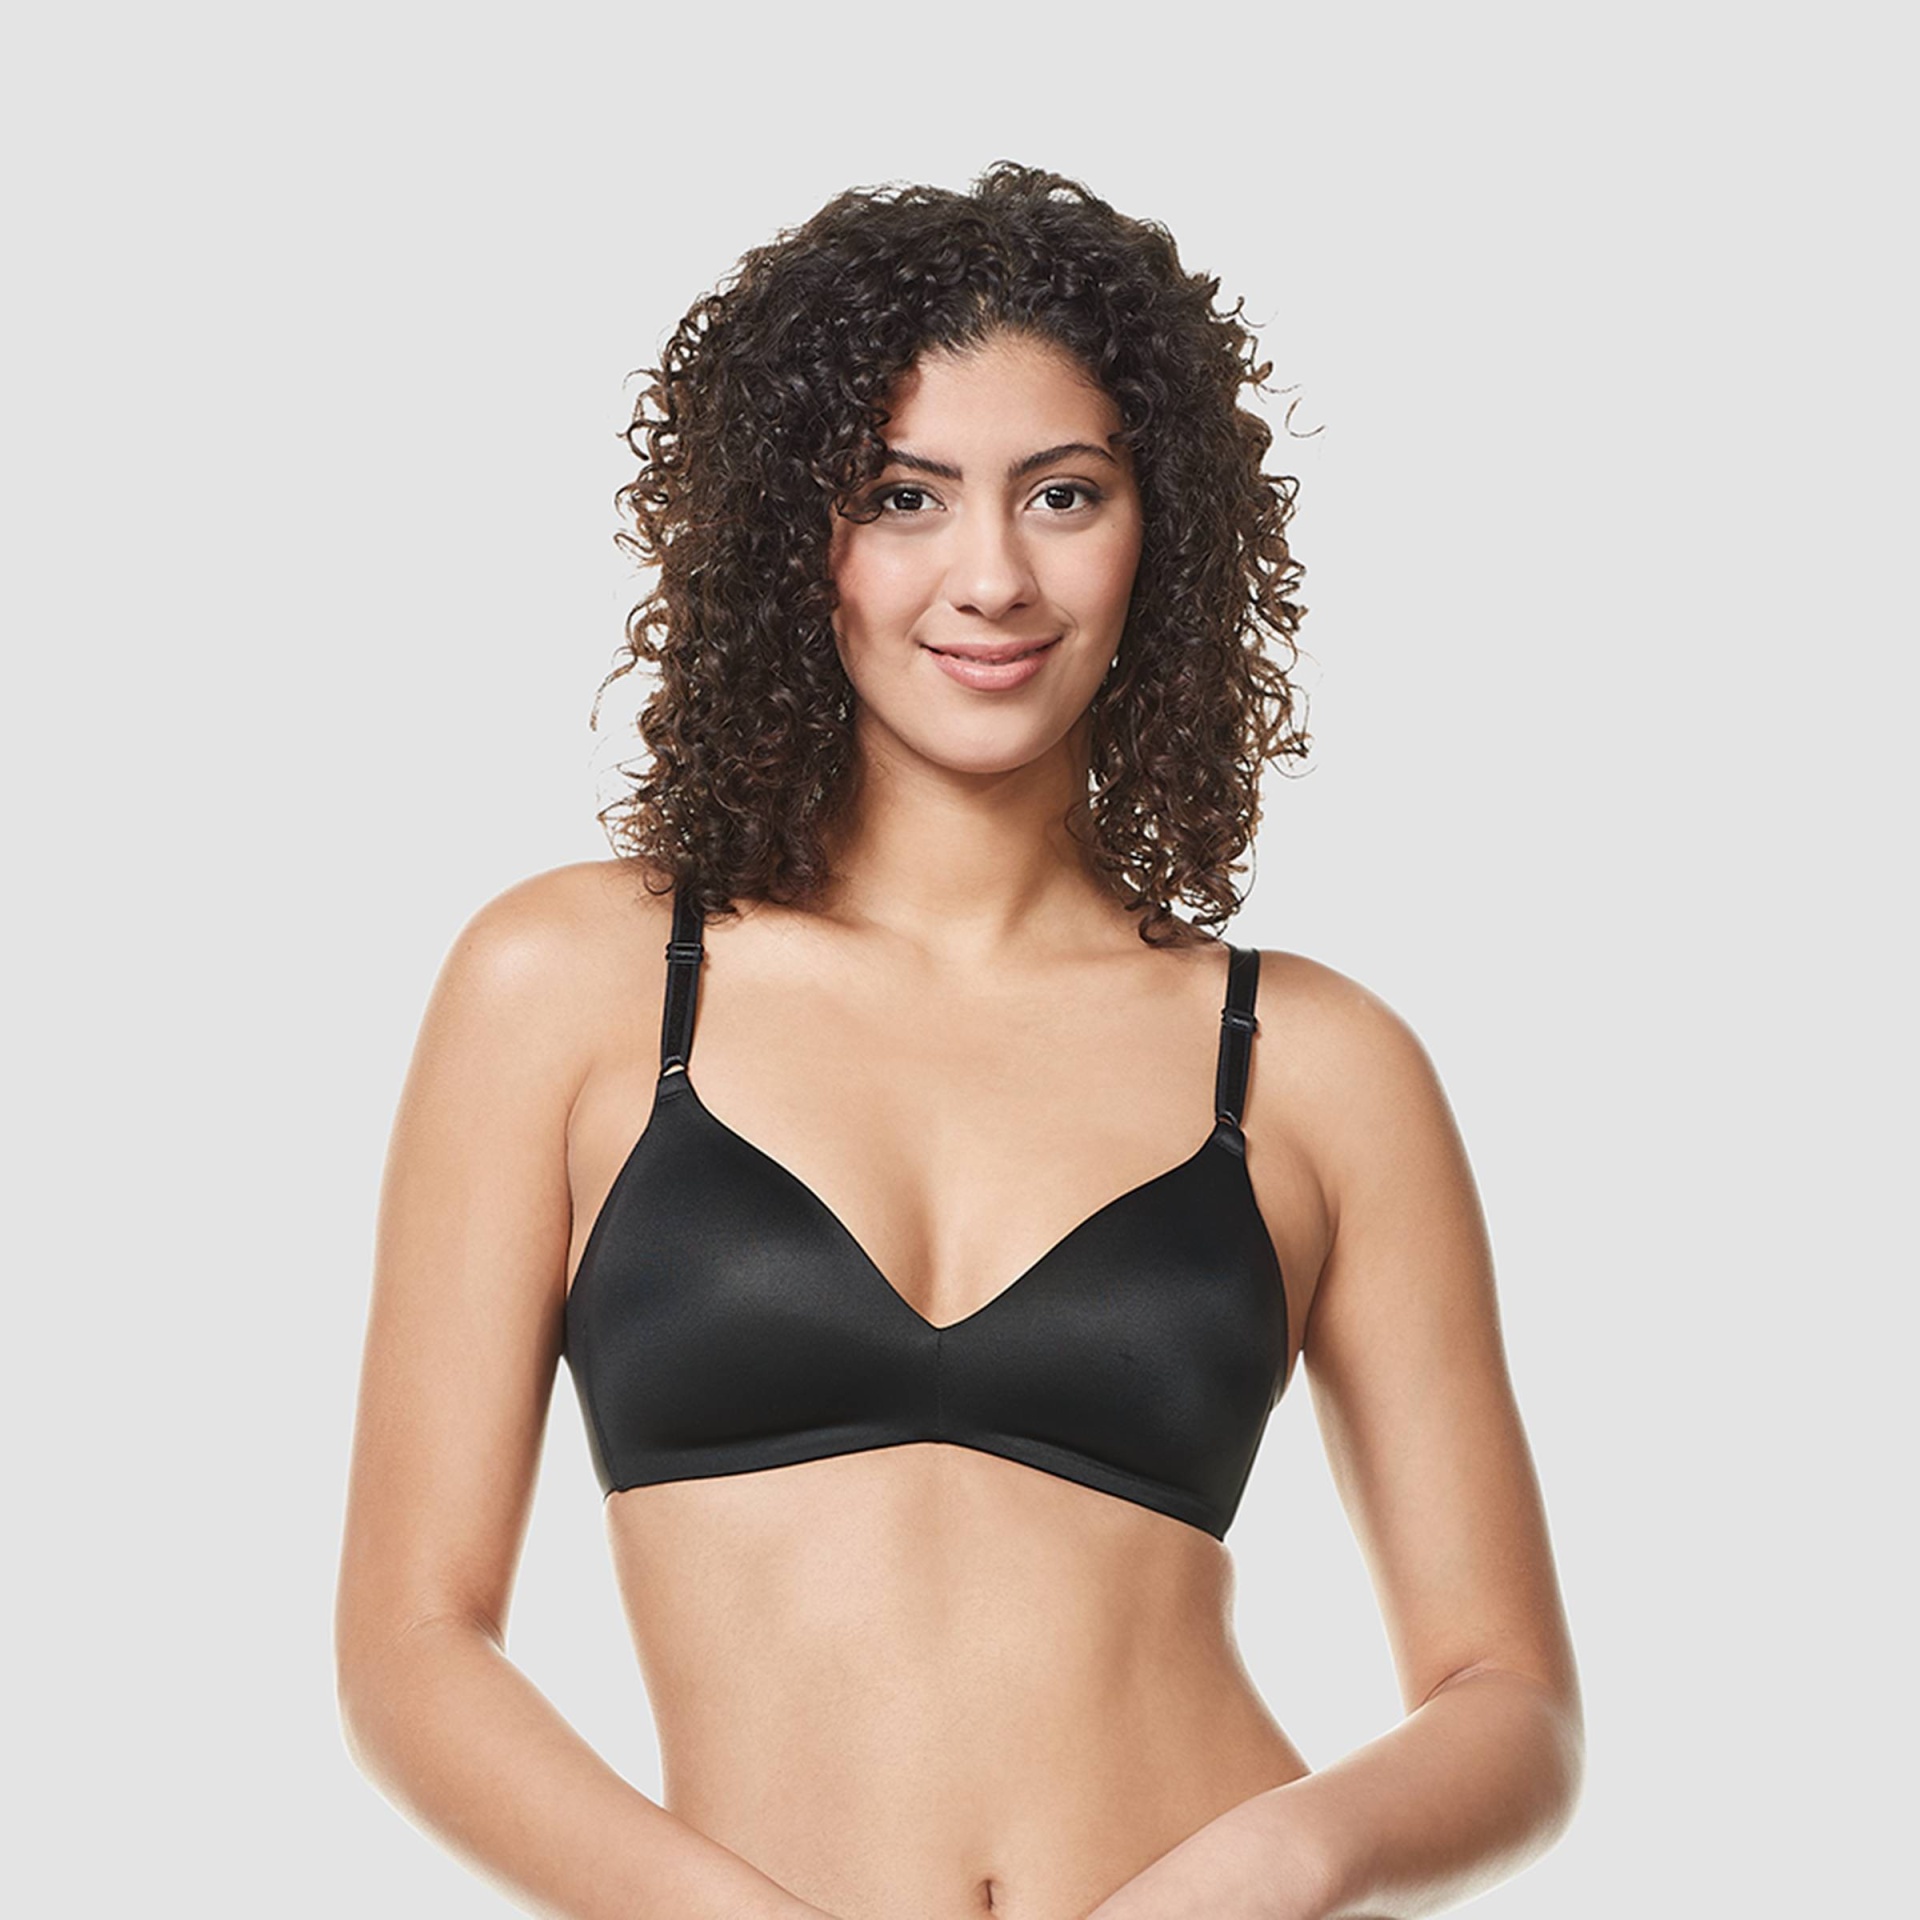 Simply Perfect By Warner's Women's Underarm Smoothing Seamless